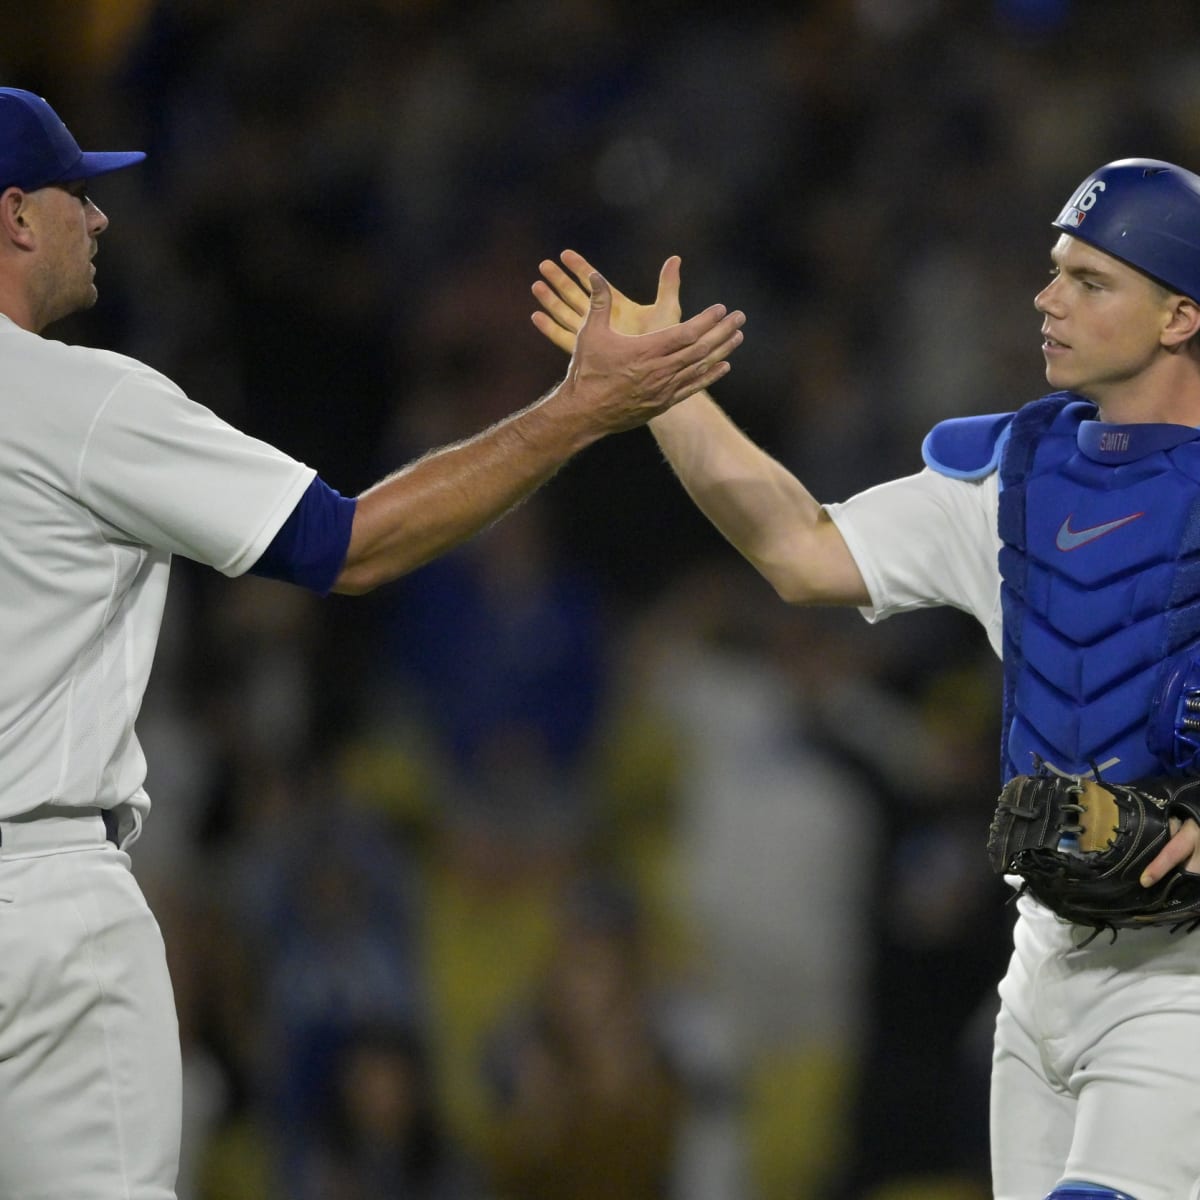 Dodgers pitcher Daniel Hudson returns just over a year after ACL injury -  The San Diego Union-Tribune